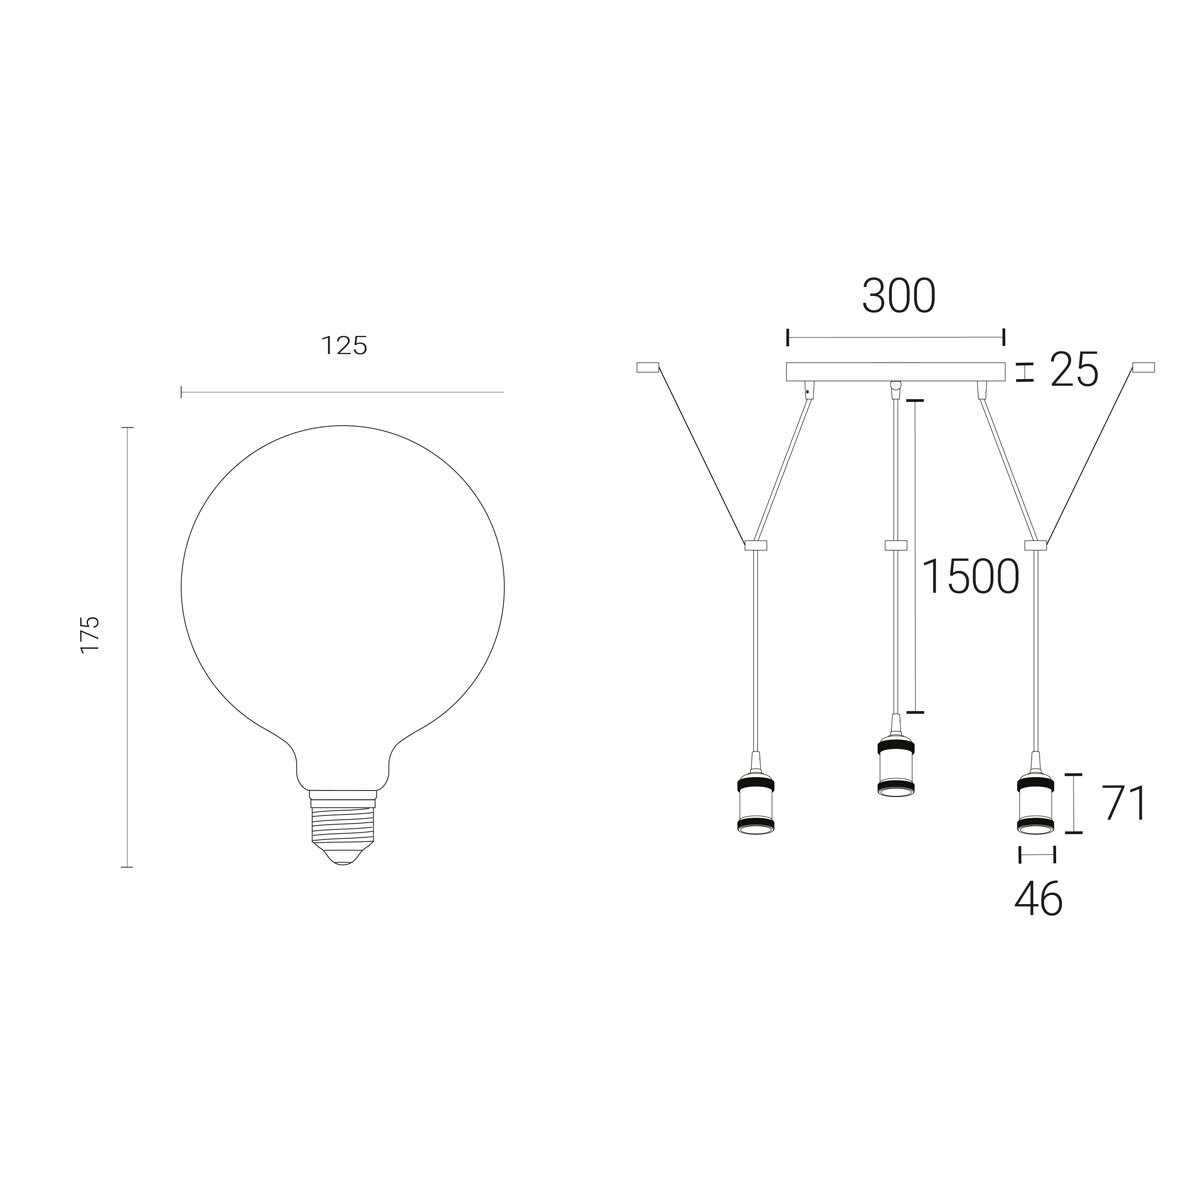 Line drawing of light fixture on white background